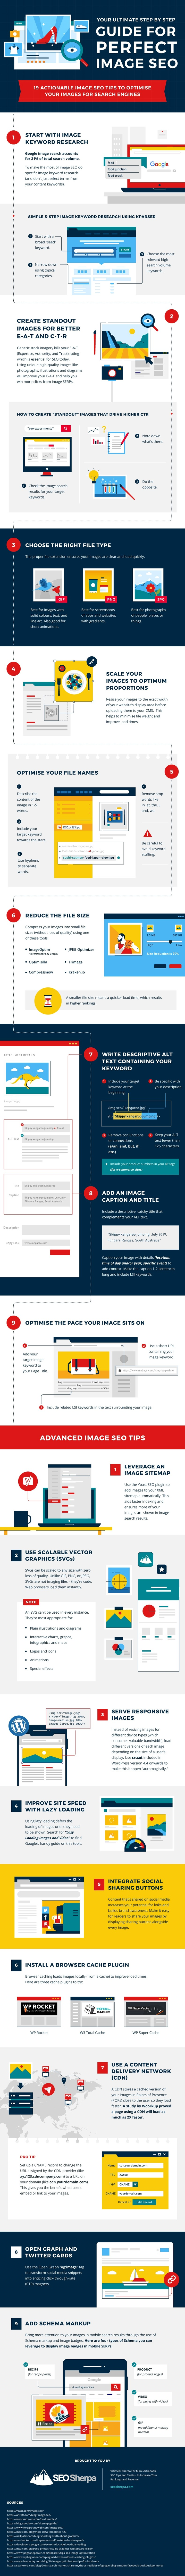 Image SEO: A 19-Step Guide for Ranking in Search Engines 1